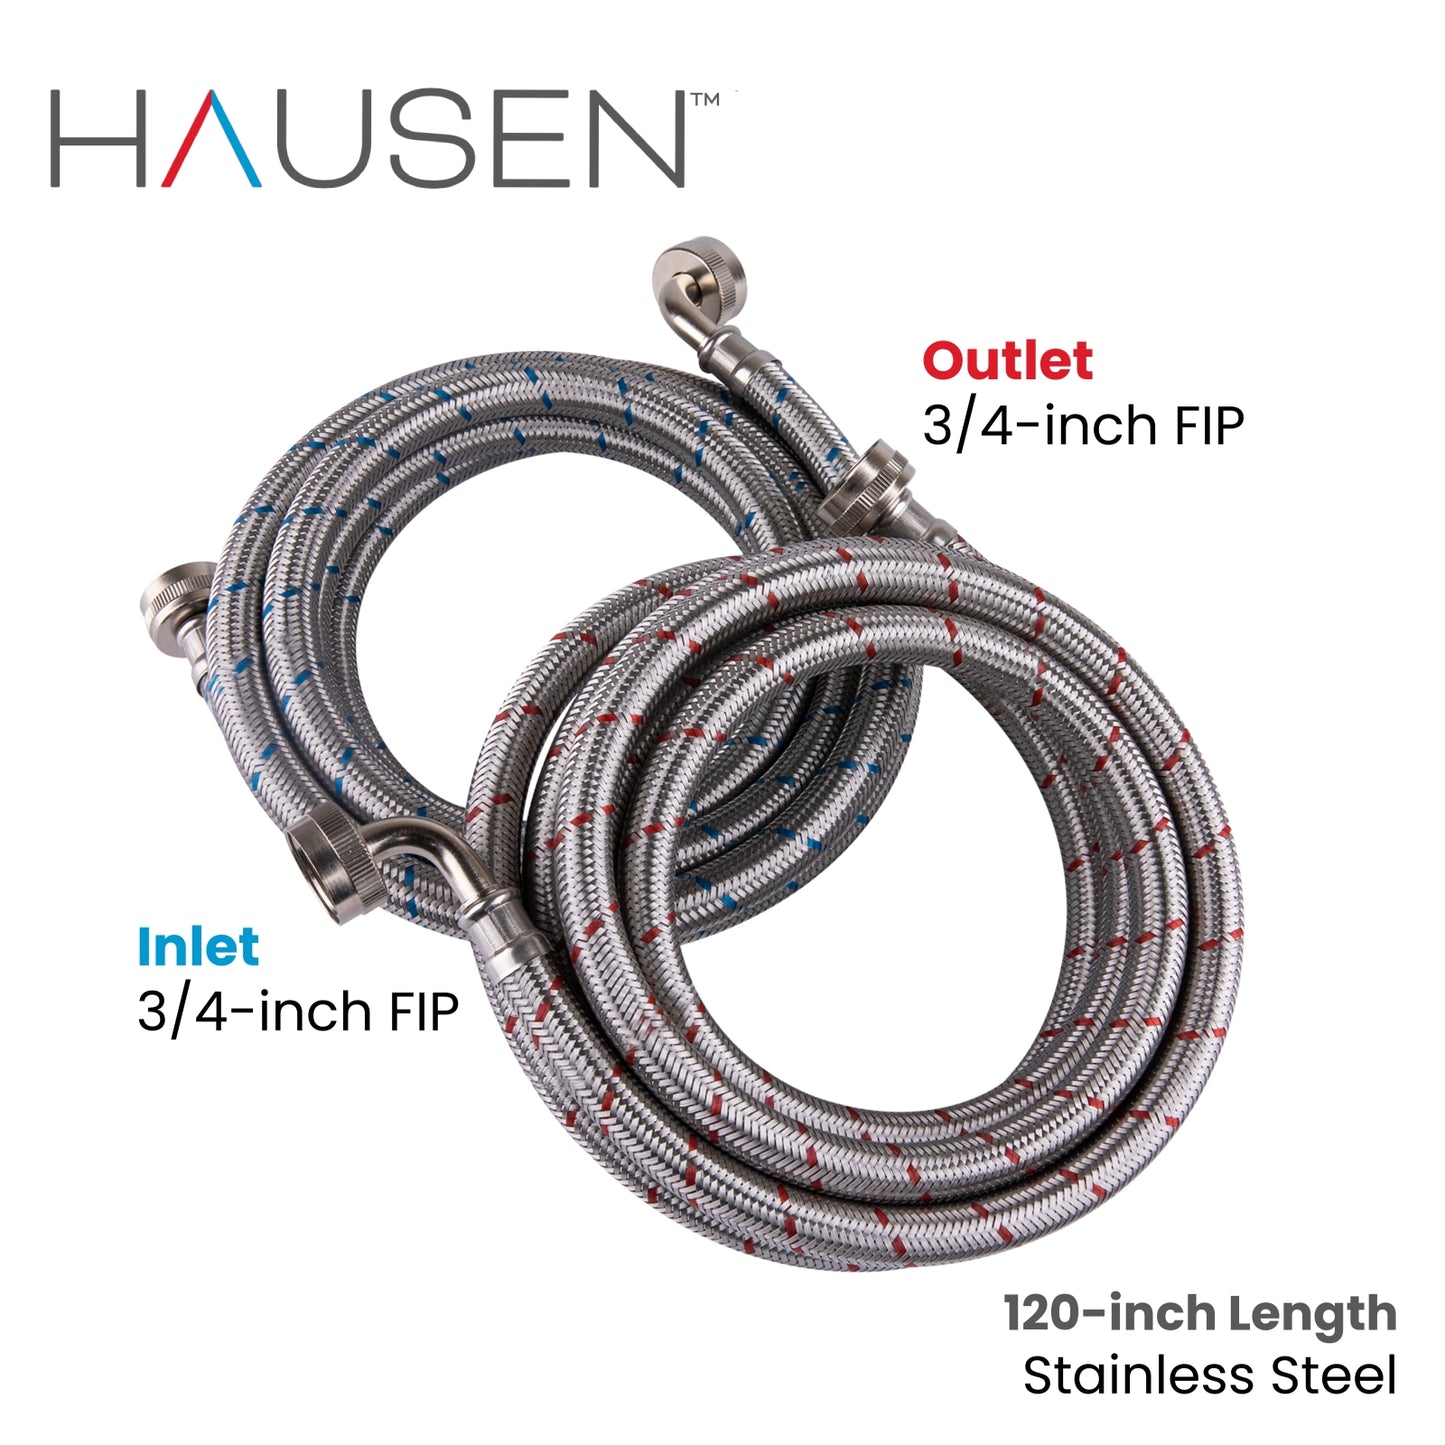 Hausen 3/4-inch FIP (Female Iron Pipe) x 3/4-inch FIP (Female Iron Pipe) x 120-inch (10-Feet) Length Stainless Steel Washing Machine Water Supply Connector with Elbow; For Cold/Hot Water Connections, 1-Pack